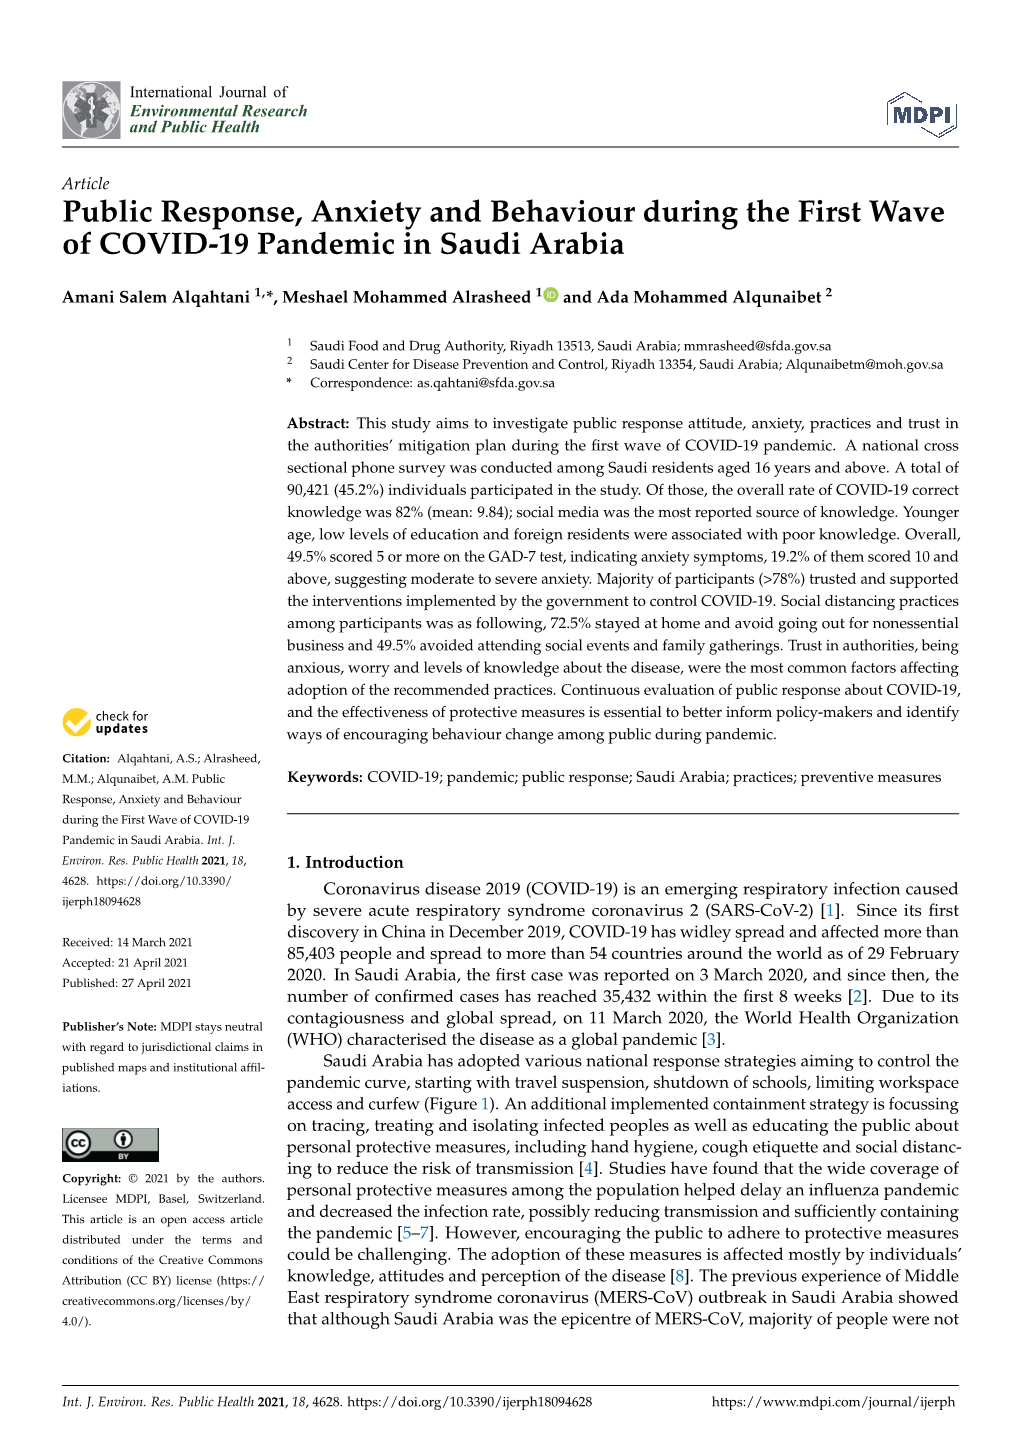 Public Response, Anxiety and Behaviour During the First Wave of COVID-19 Pandemic in Saudi Arabia